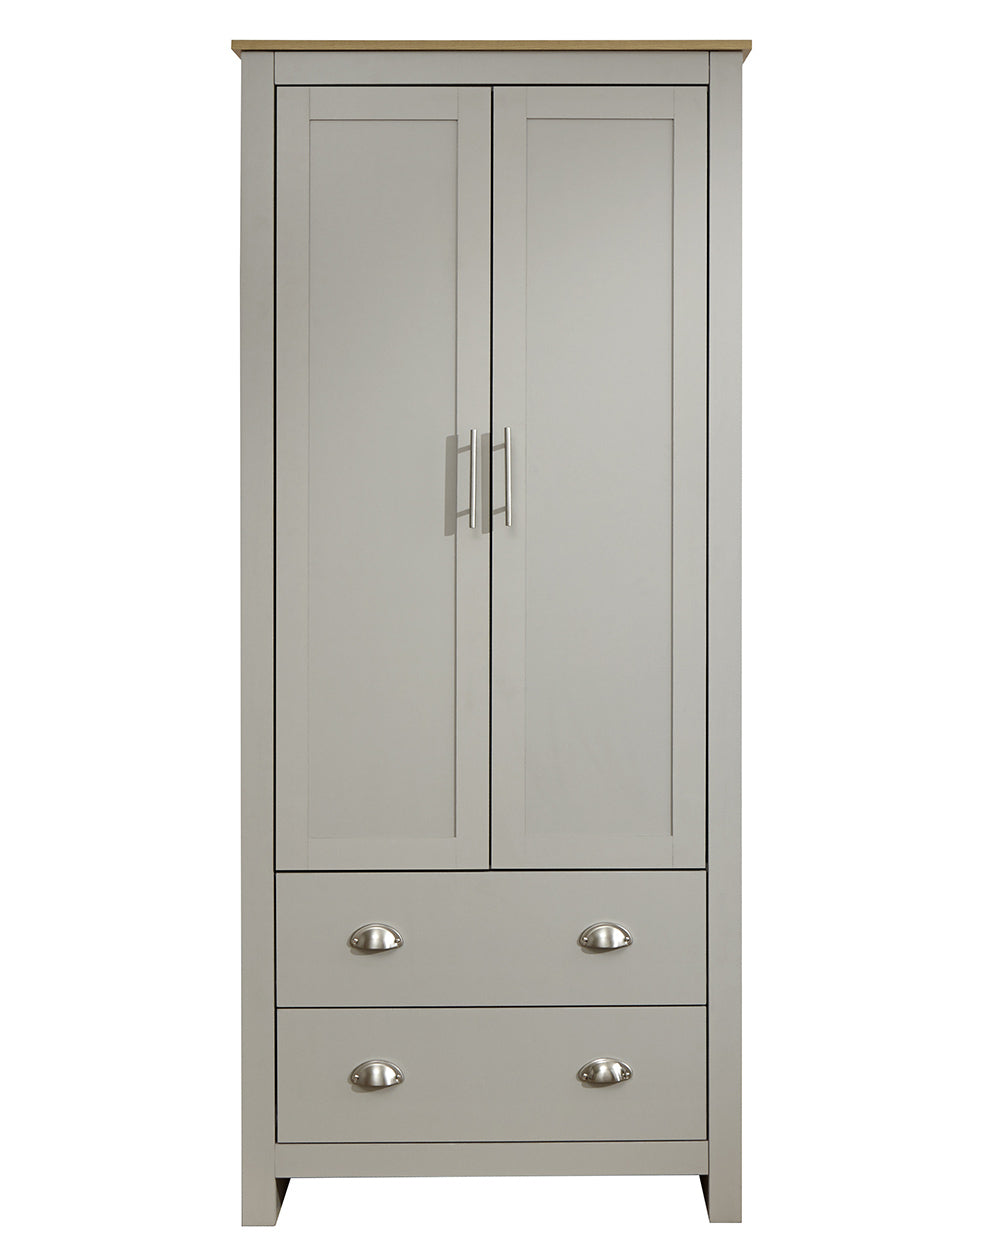 Lancaster 2 Door 2 Drawer wardrobe in sleek grey with an oak effect top on a white cut out back ground